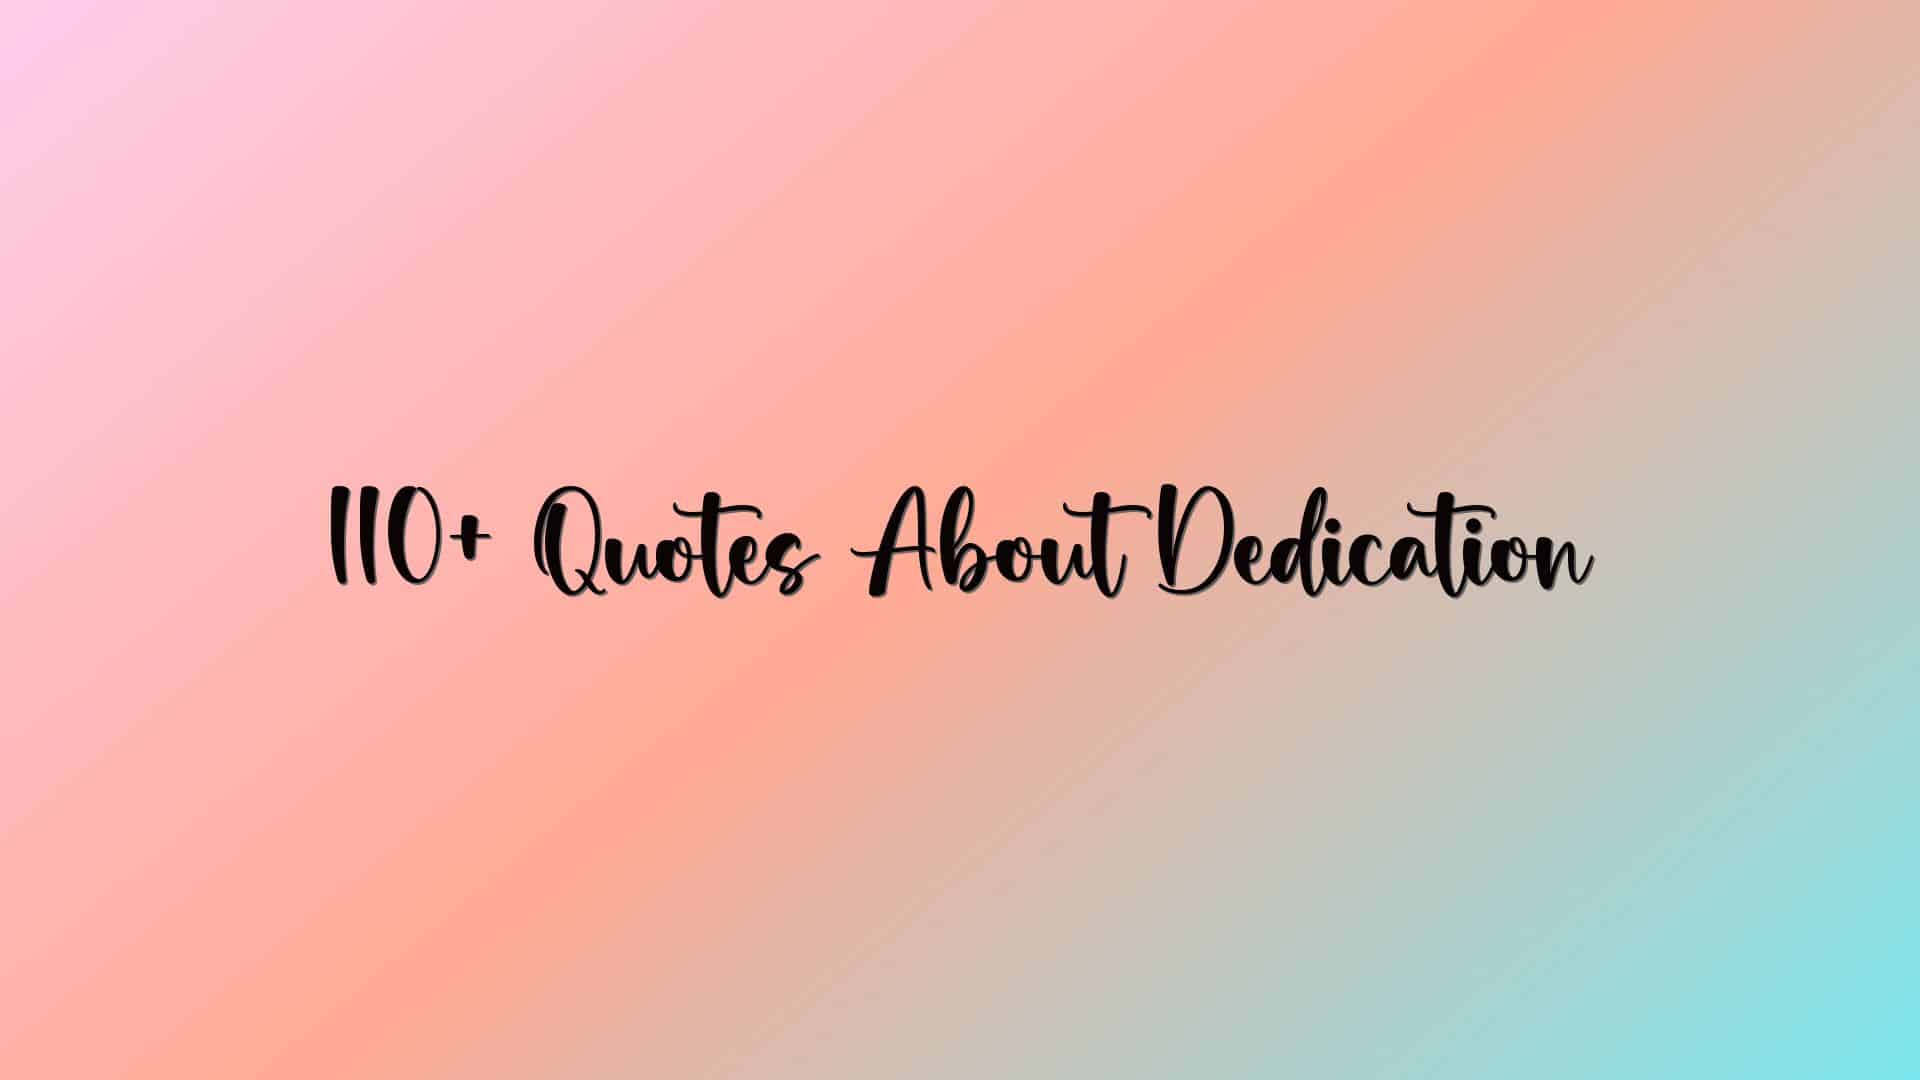 110+ Quotes About Dedication